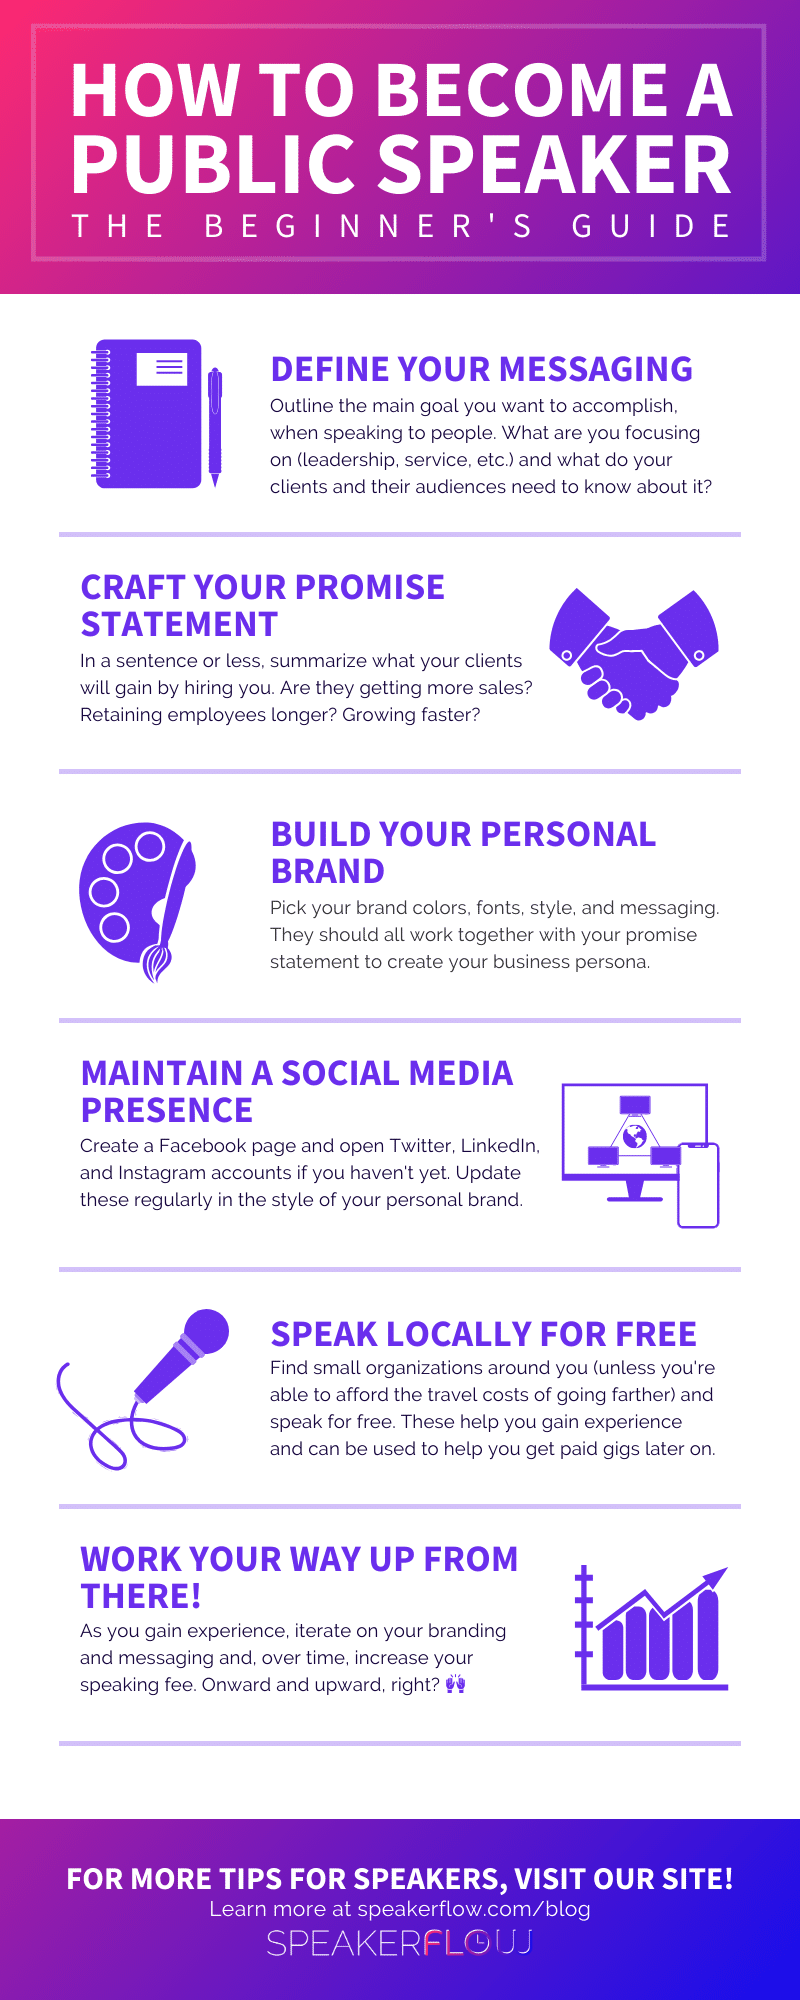 Infographic for How To Become A Public Speaker The Beginner's Guide - SpeakerFlow